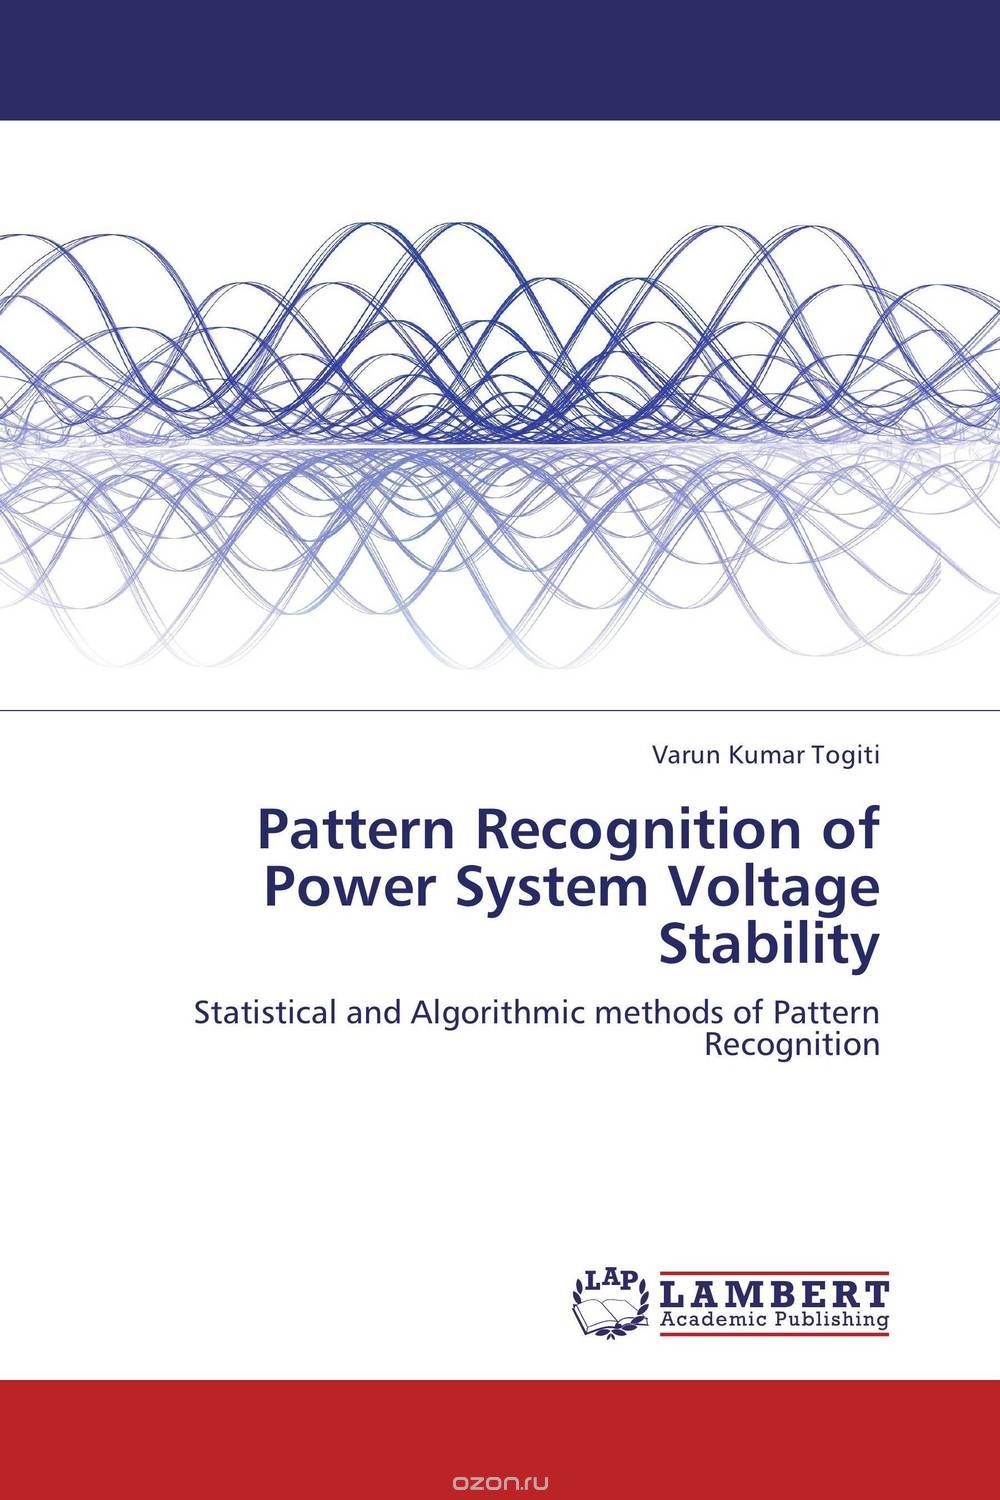 Pattern Recognition of Power System Voltage Stability